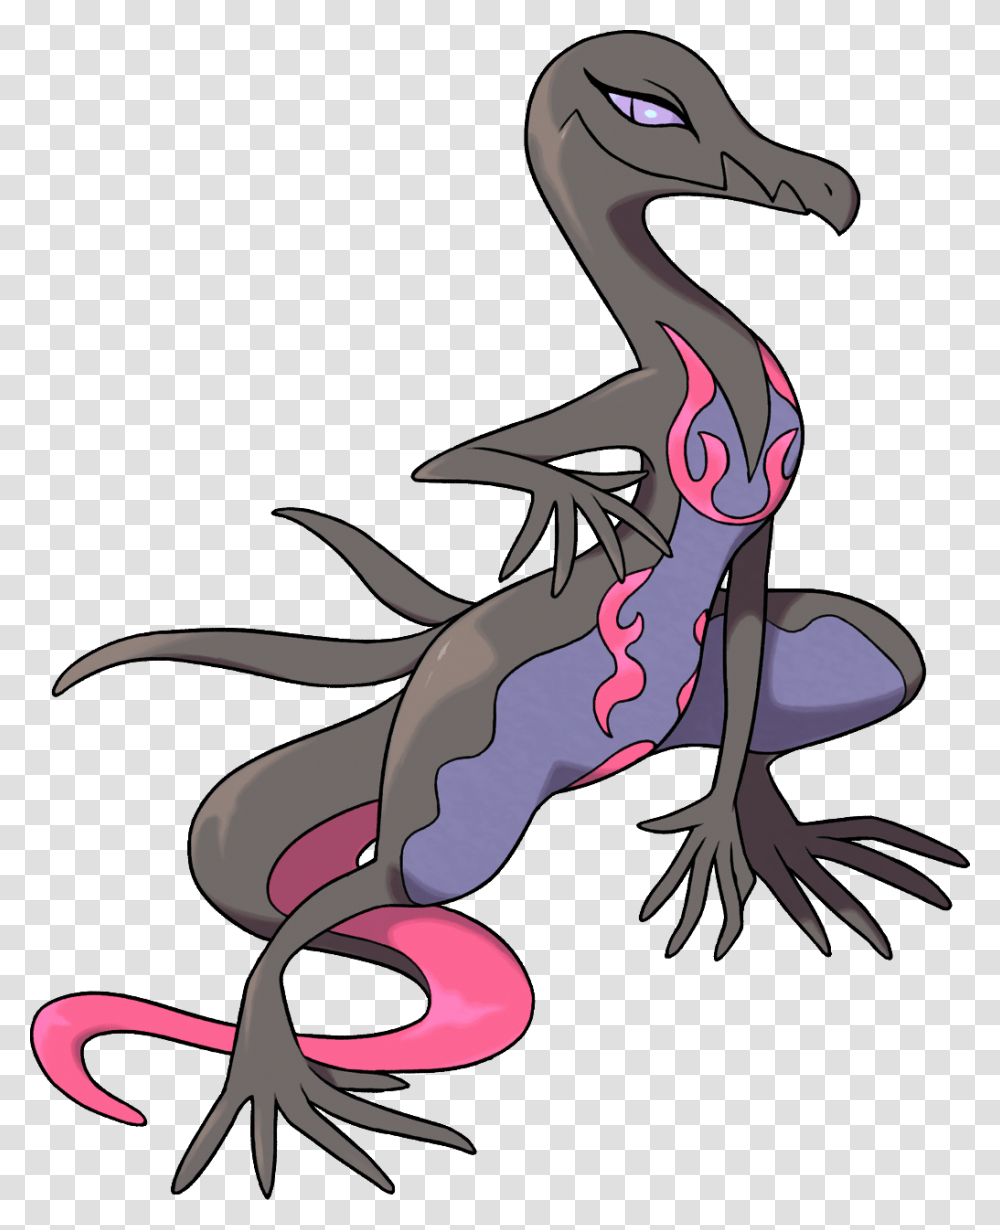 Salazzle Pokemon Sun And Moon Salazzle Sword And Shield, Dragon, Animal, Anole, Reptile Transparent Png